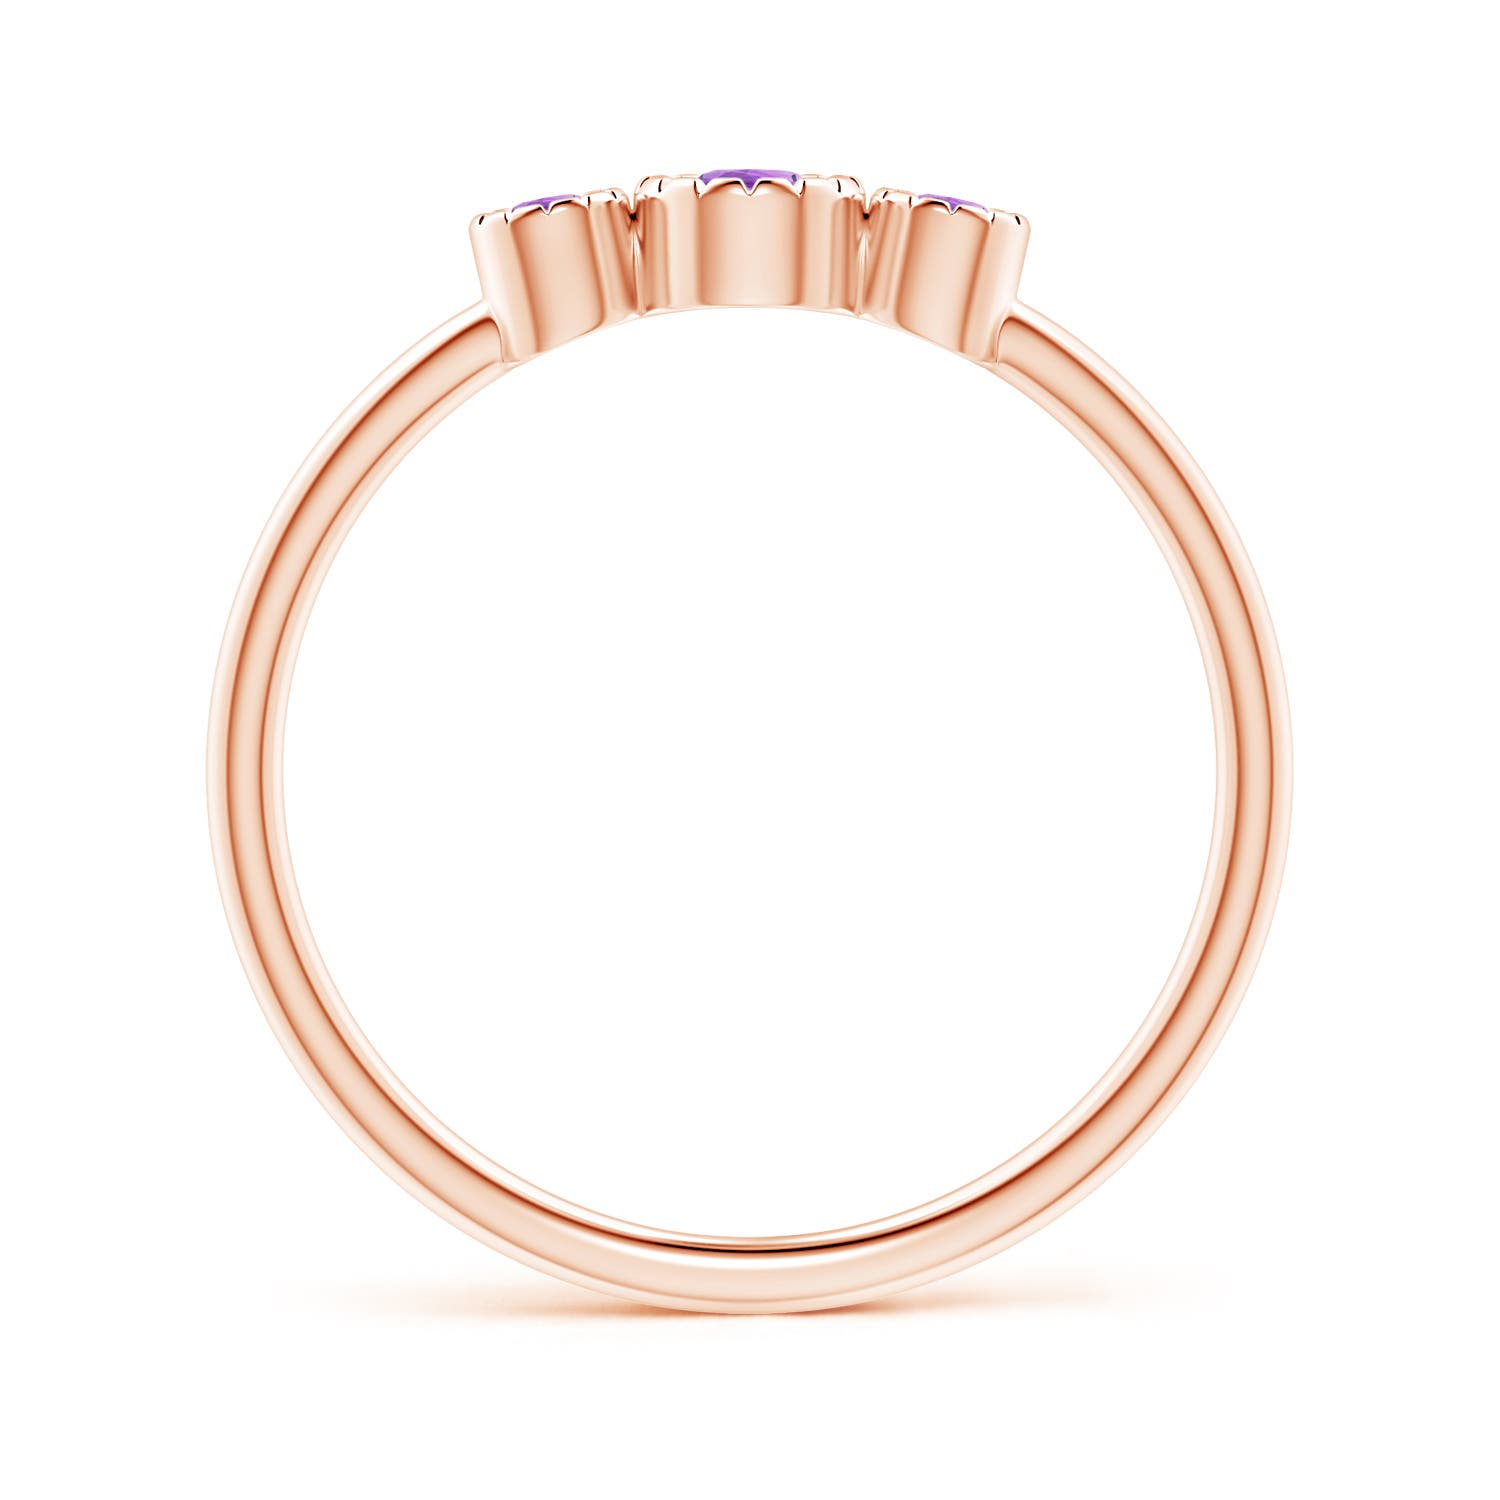 AAA - Amethyst / 0.16 CT / 14 KT Rose Gold